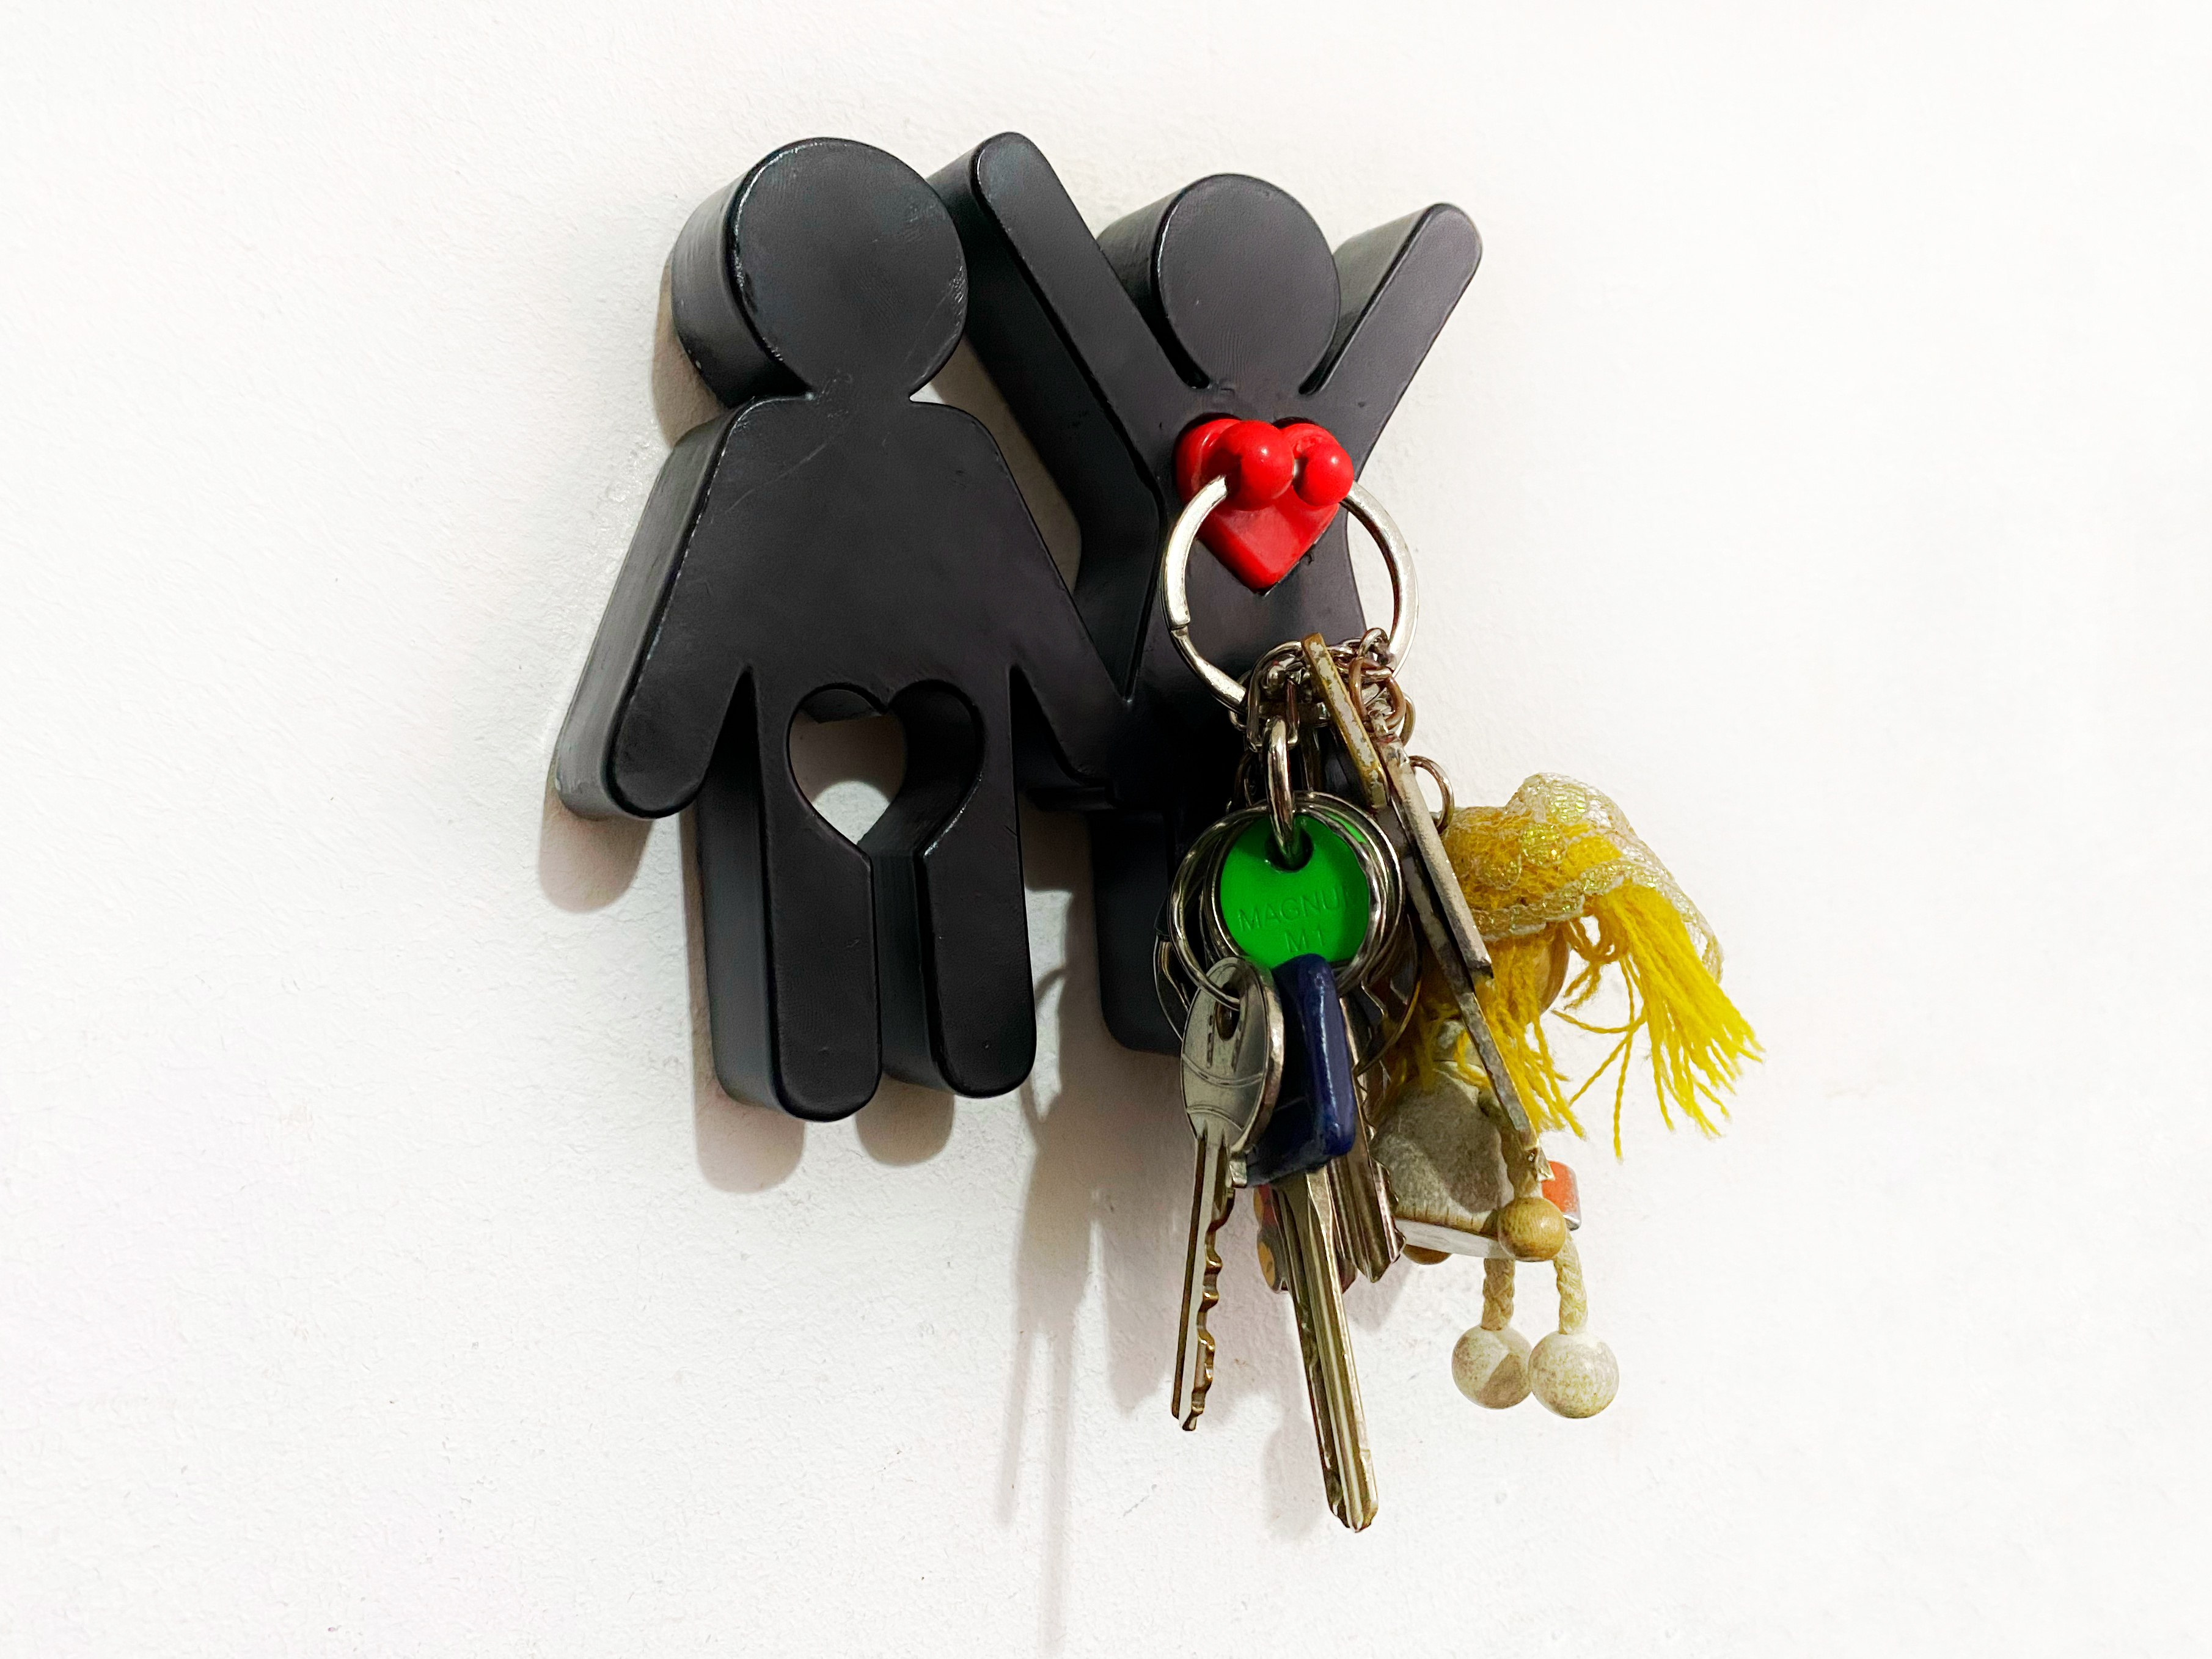 Home Key holder with matching key chains